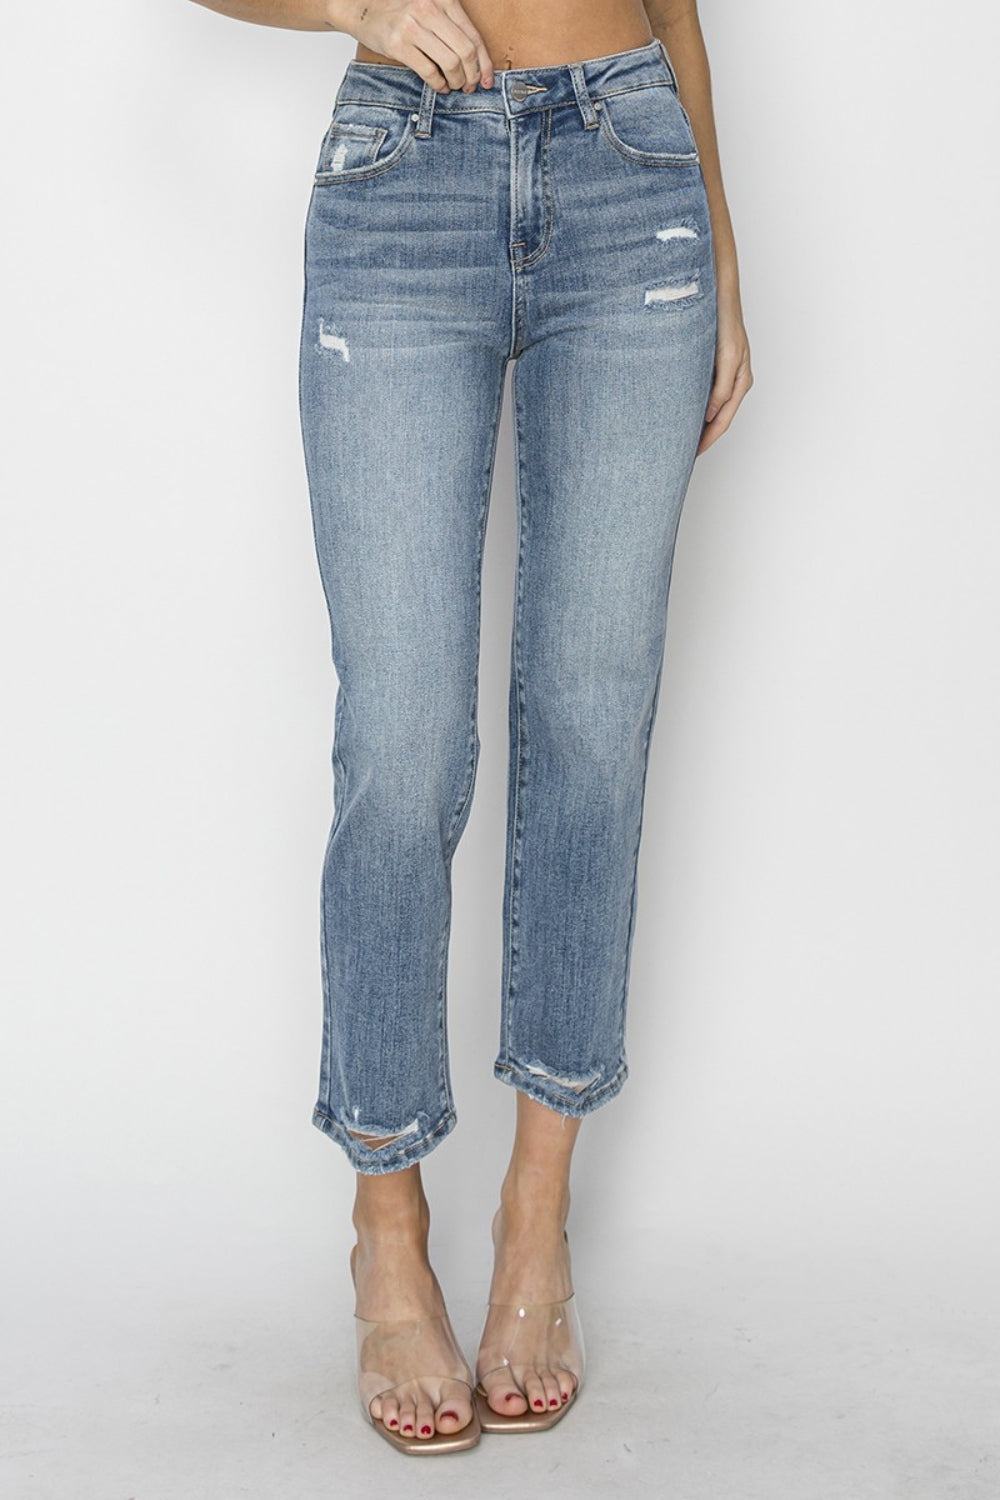 RISEN Full Size High Waist Distressed Cropped Jeans | Augie & April